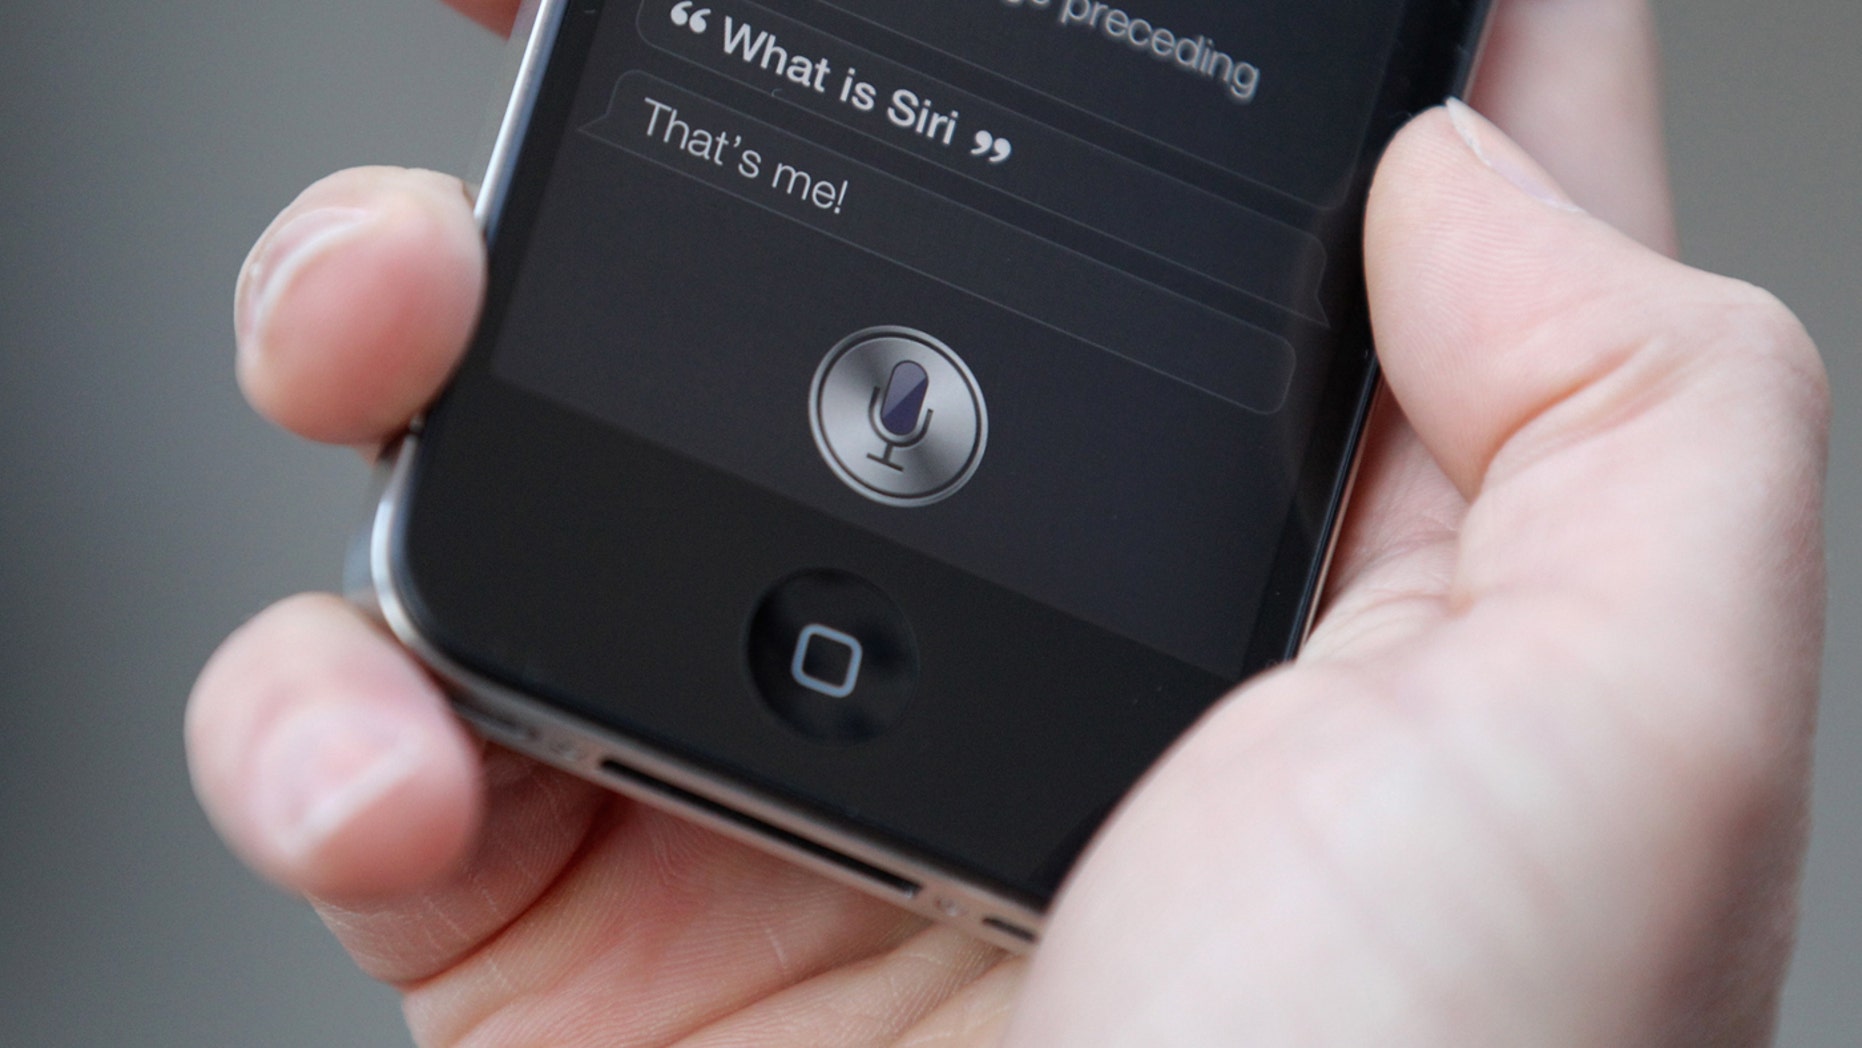 Indiana boy, 13, arrested after telling Siri he wanted to shoot up a school